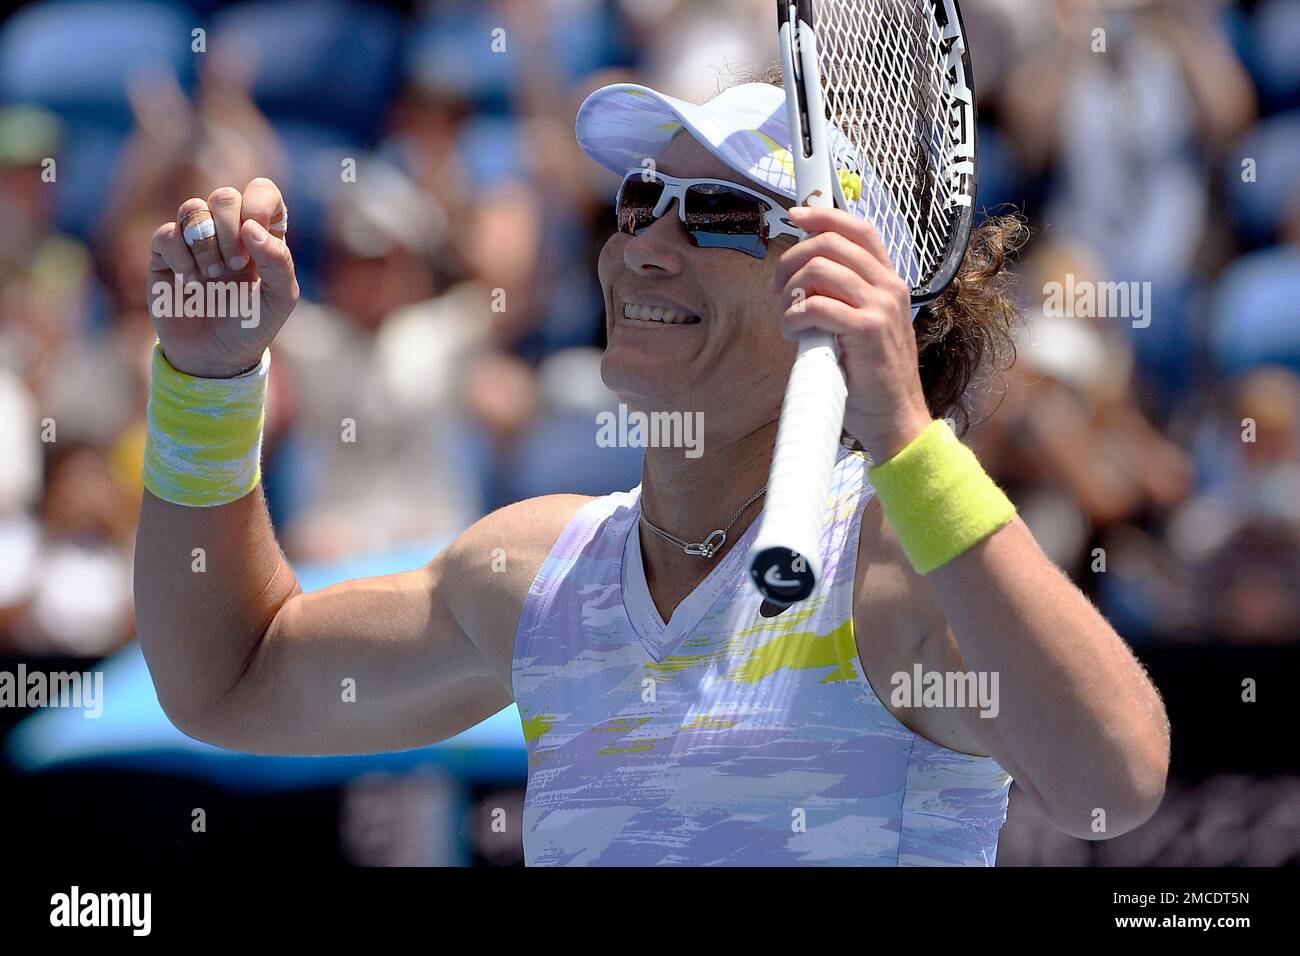 Samantha Stosur of Australia reacts after defeating Robin Anderson of the  U.S. in their first round match at the Australian Open tennis championships  in Melbourne, Australia, Tuesday, Jan. 18, 2022. (AP Photo/Andy